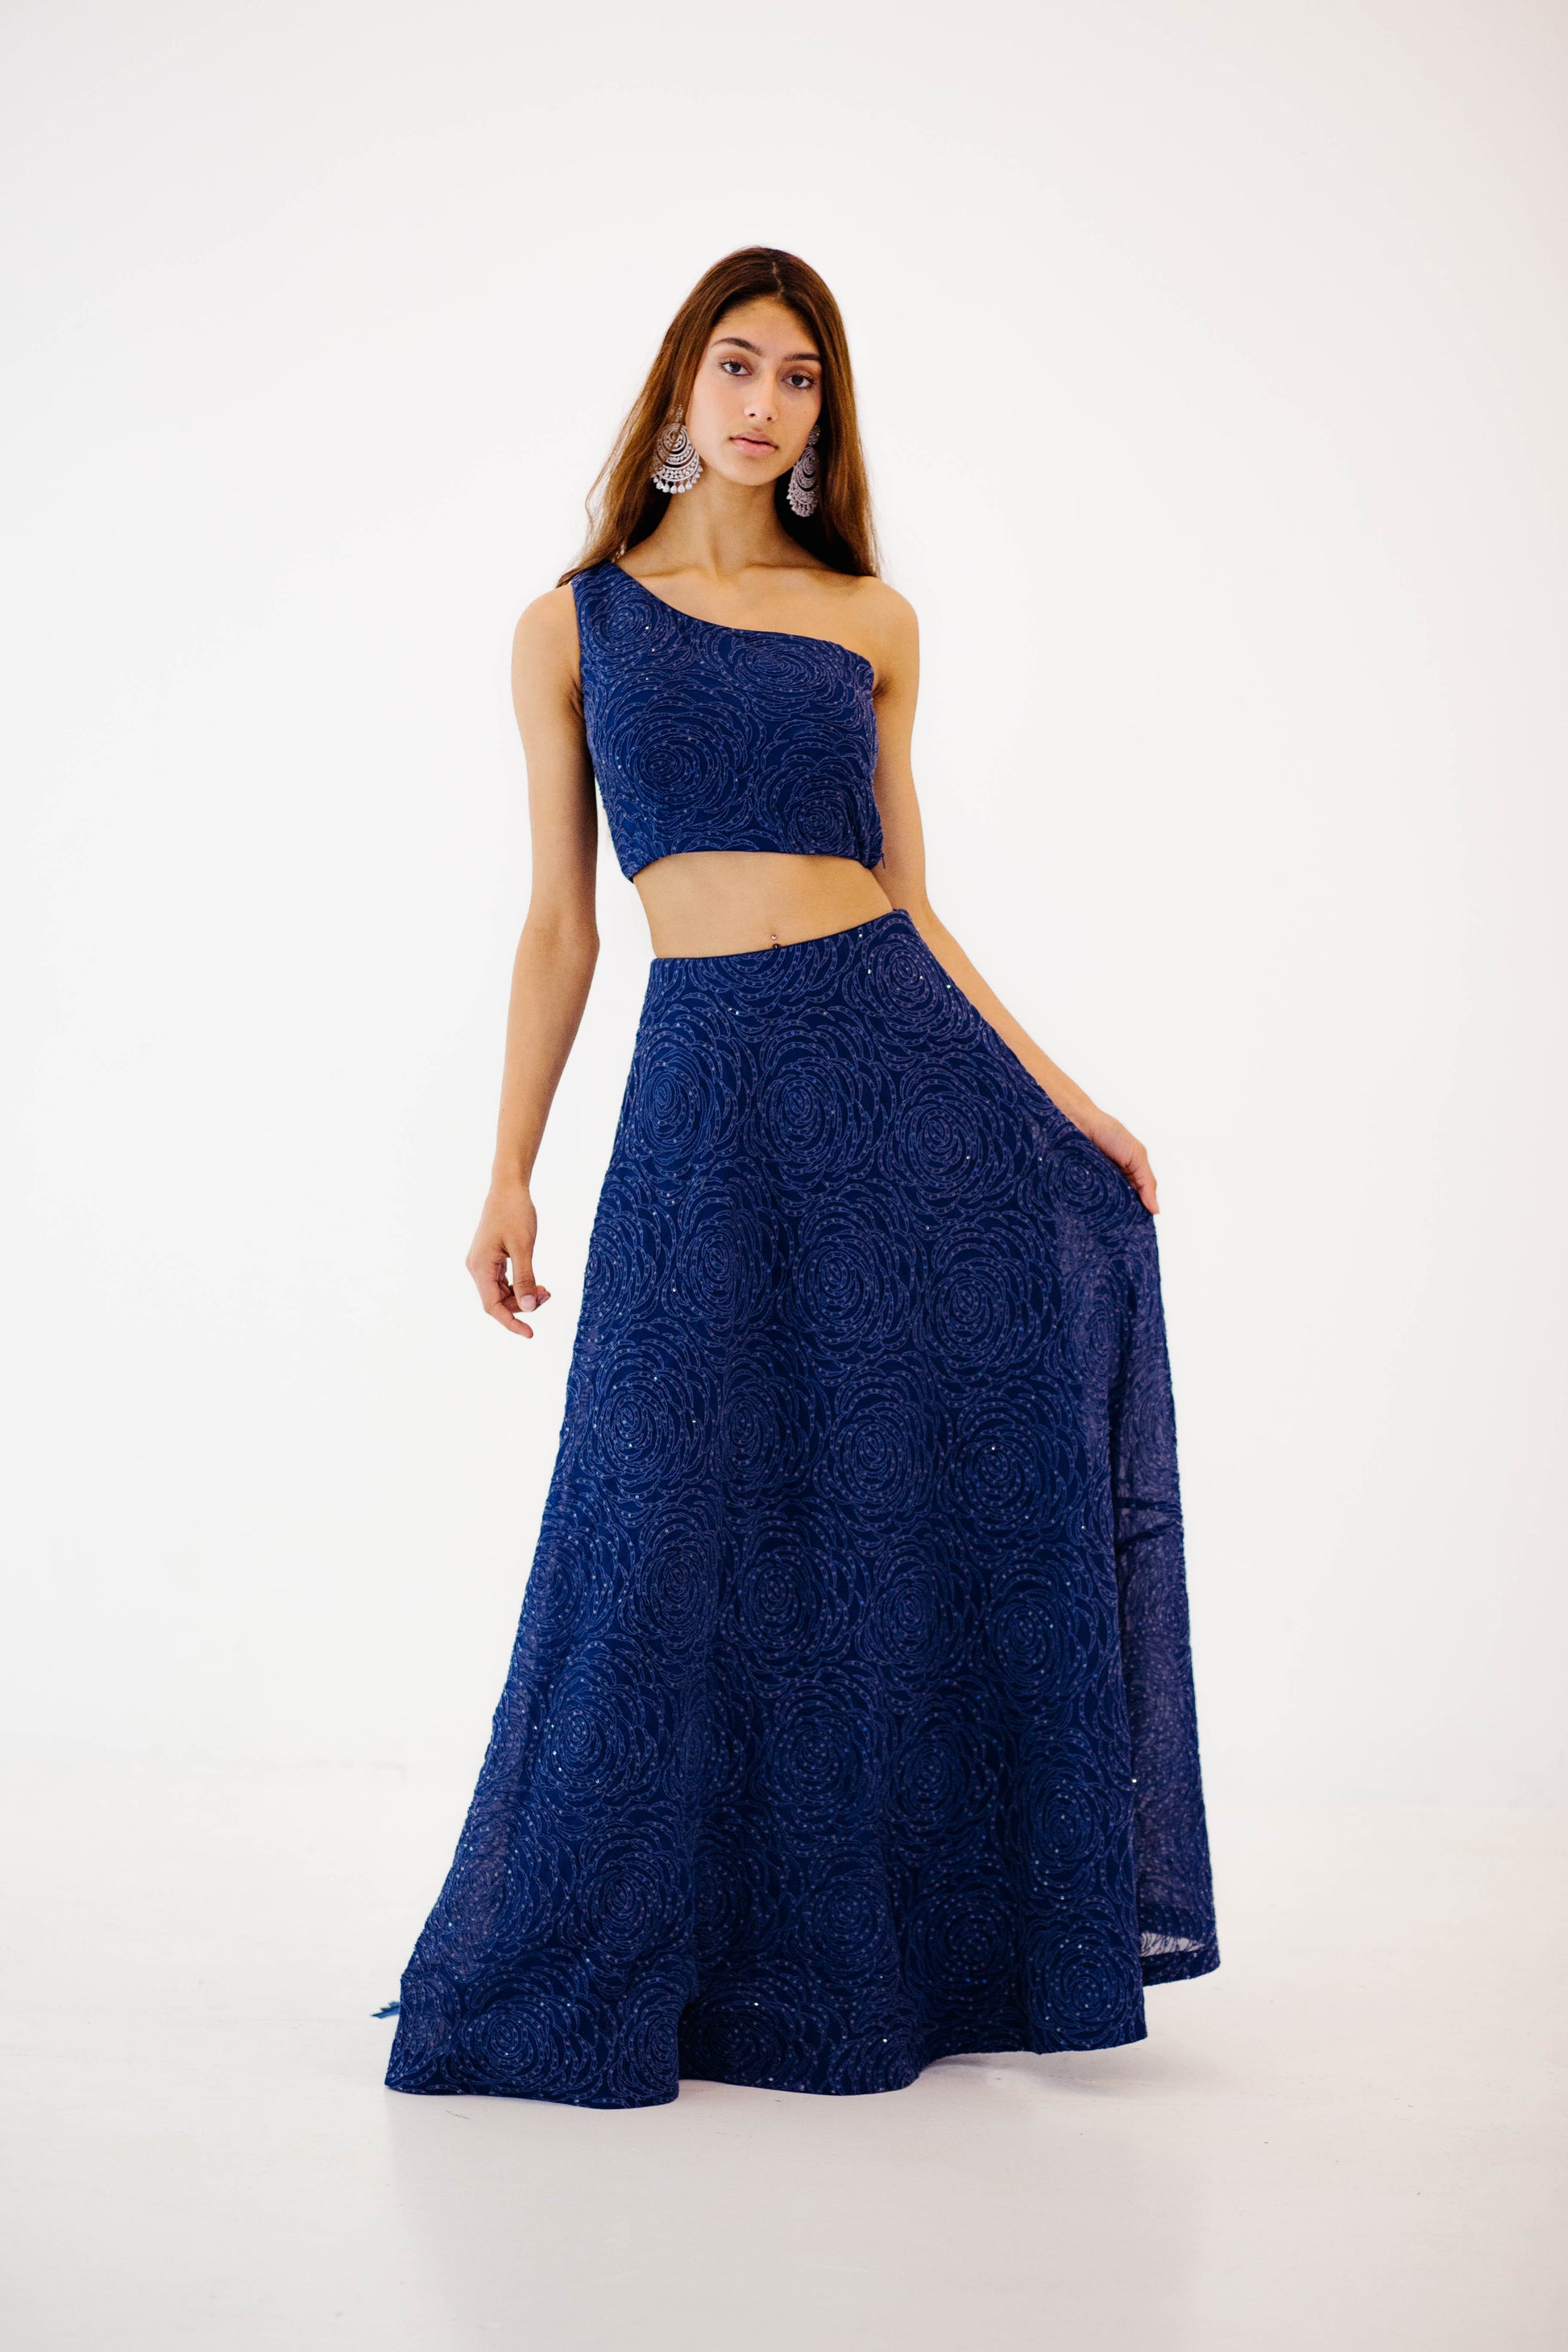 The Raz Lehenga has a dark blue georgette skirt with thread and sequin work in the shape of roses, featuring a one shoulder blouse, and is paired with a matching dupatta.